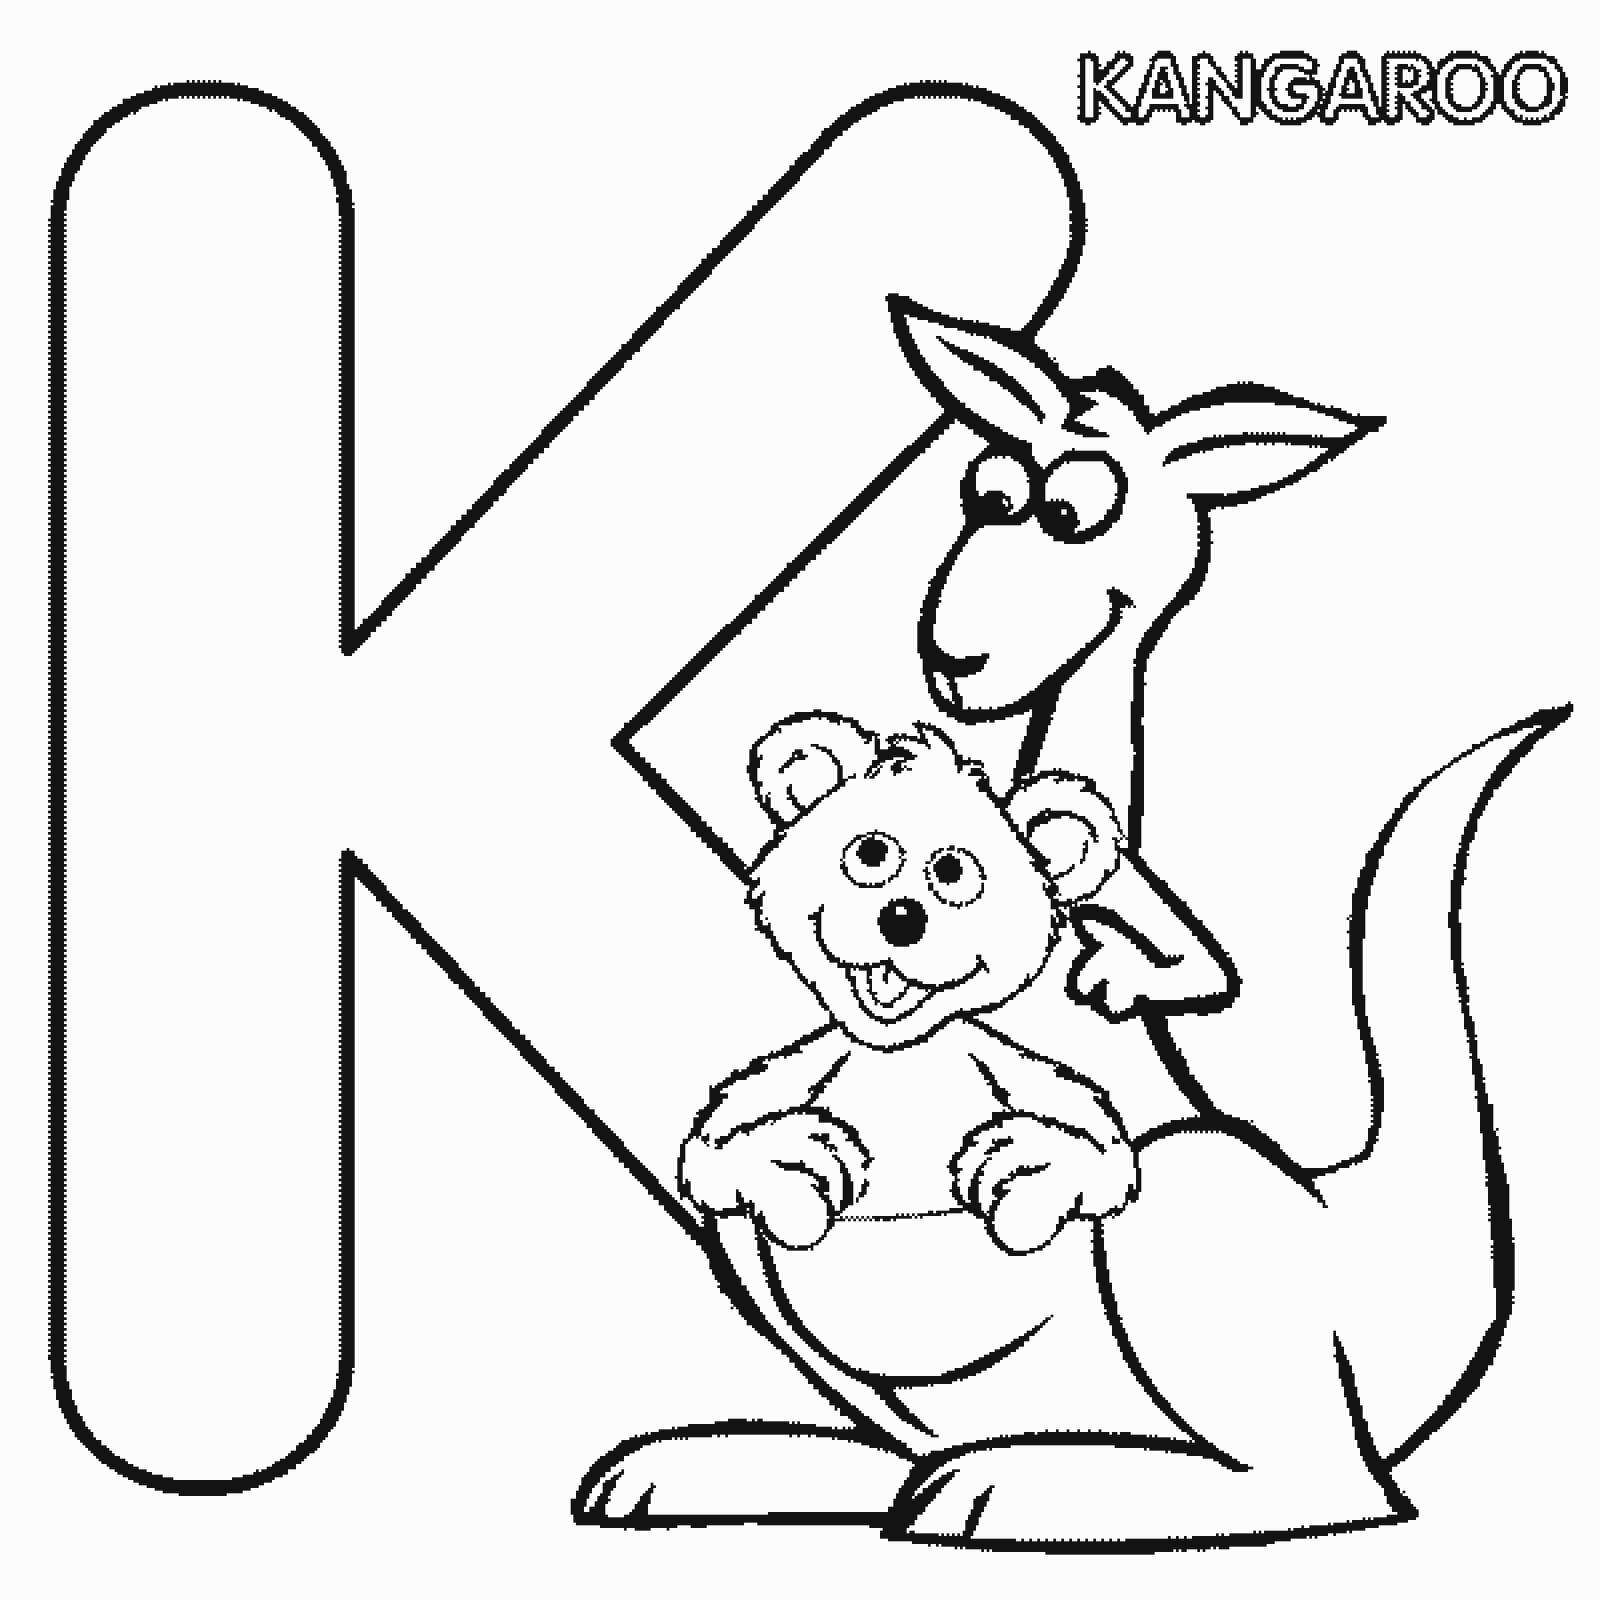 K Coloring Pages
 Letter K Coloring Page Coloring Home